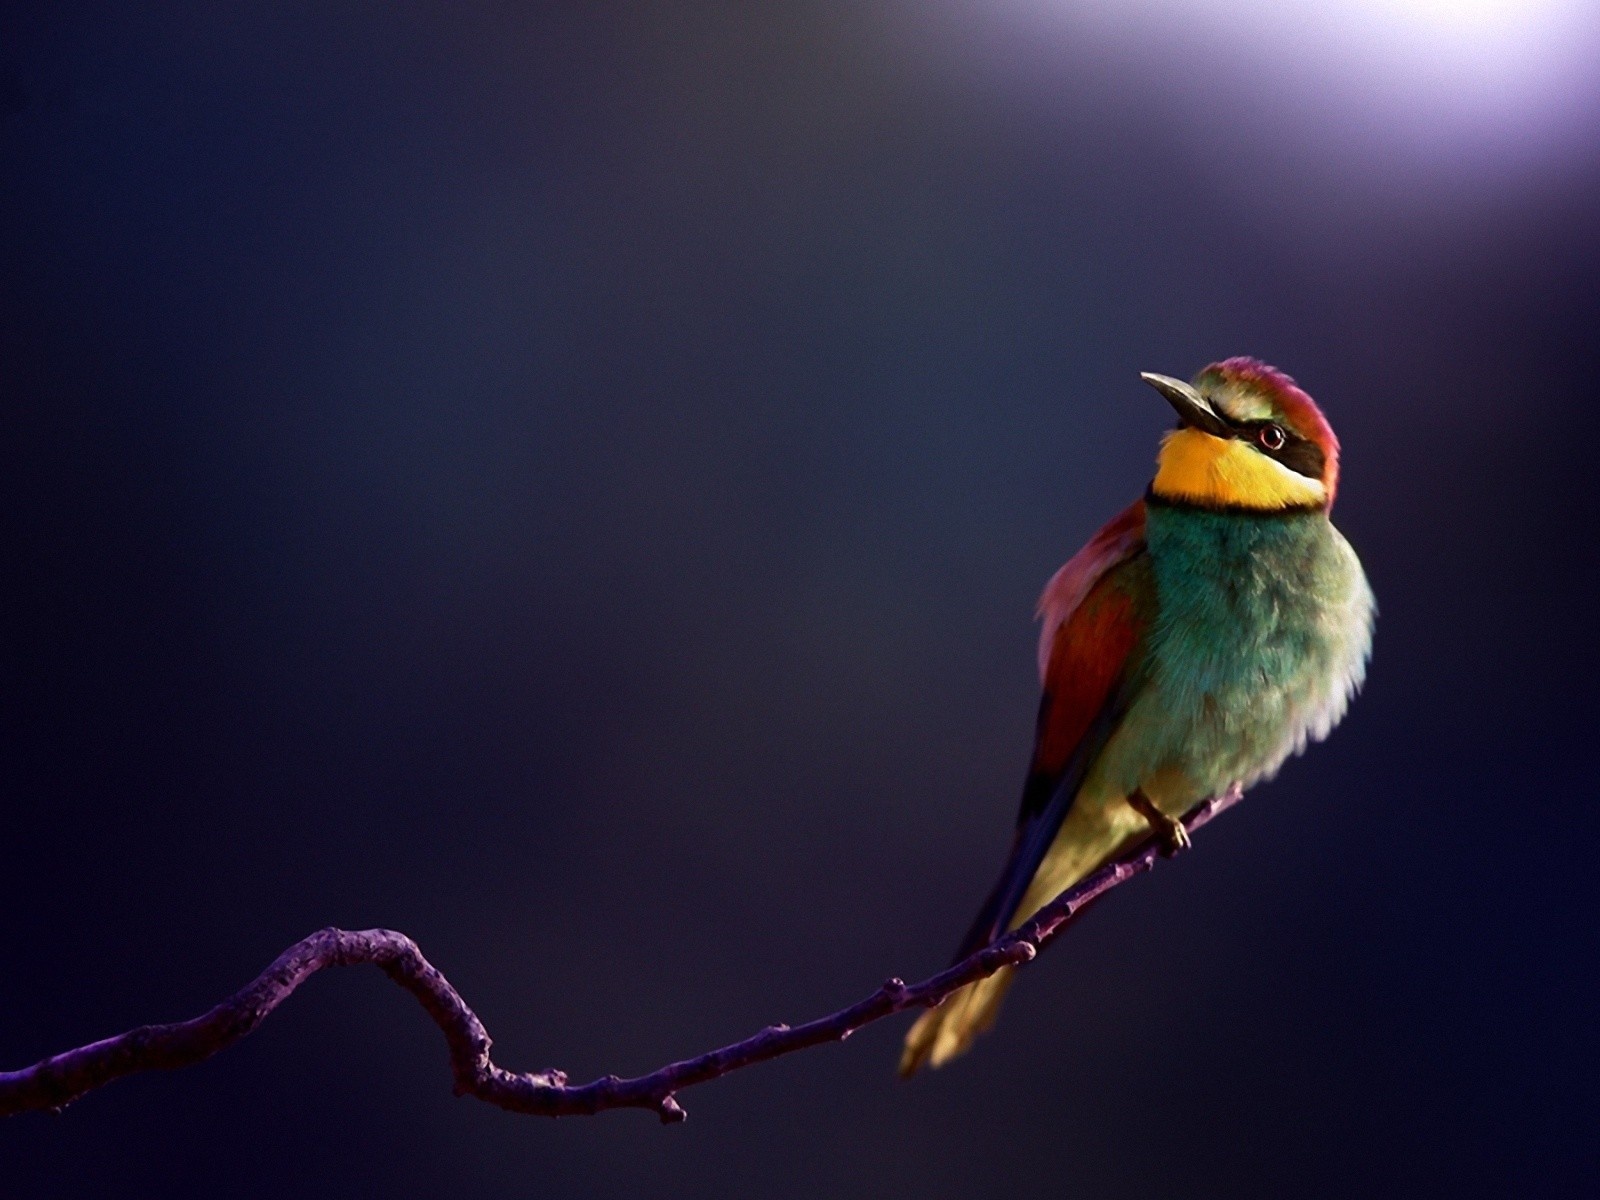 Cute Animals Poster, Bee Eater Photo, a Colorful Bird on Thin ...